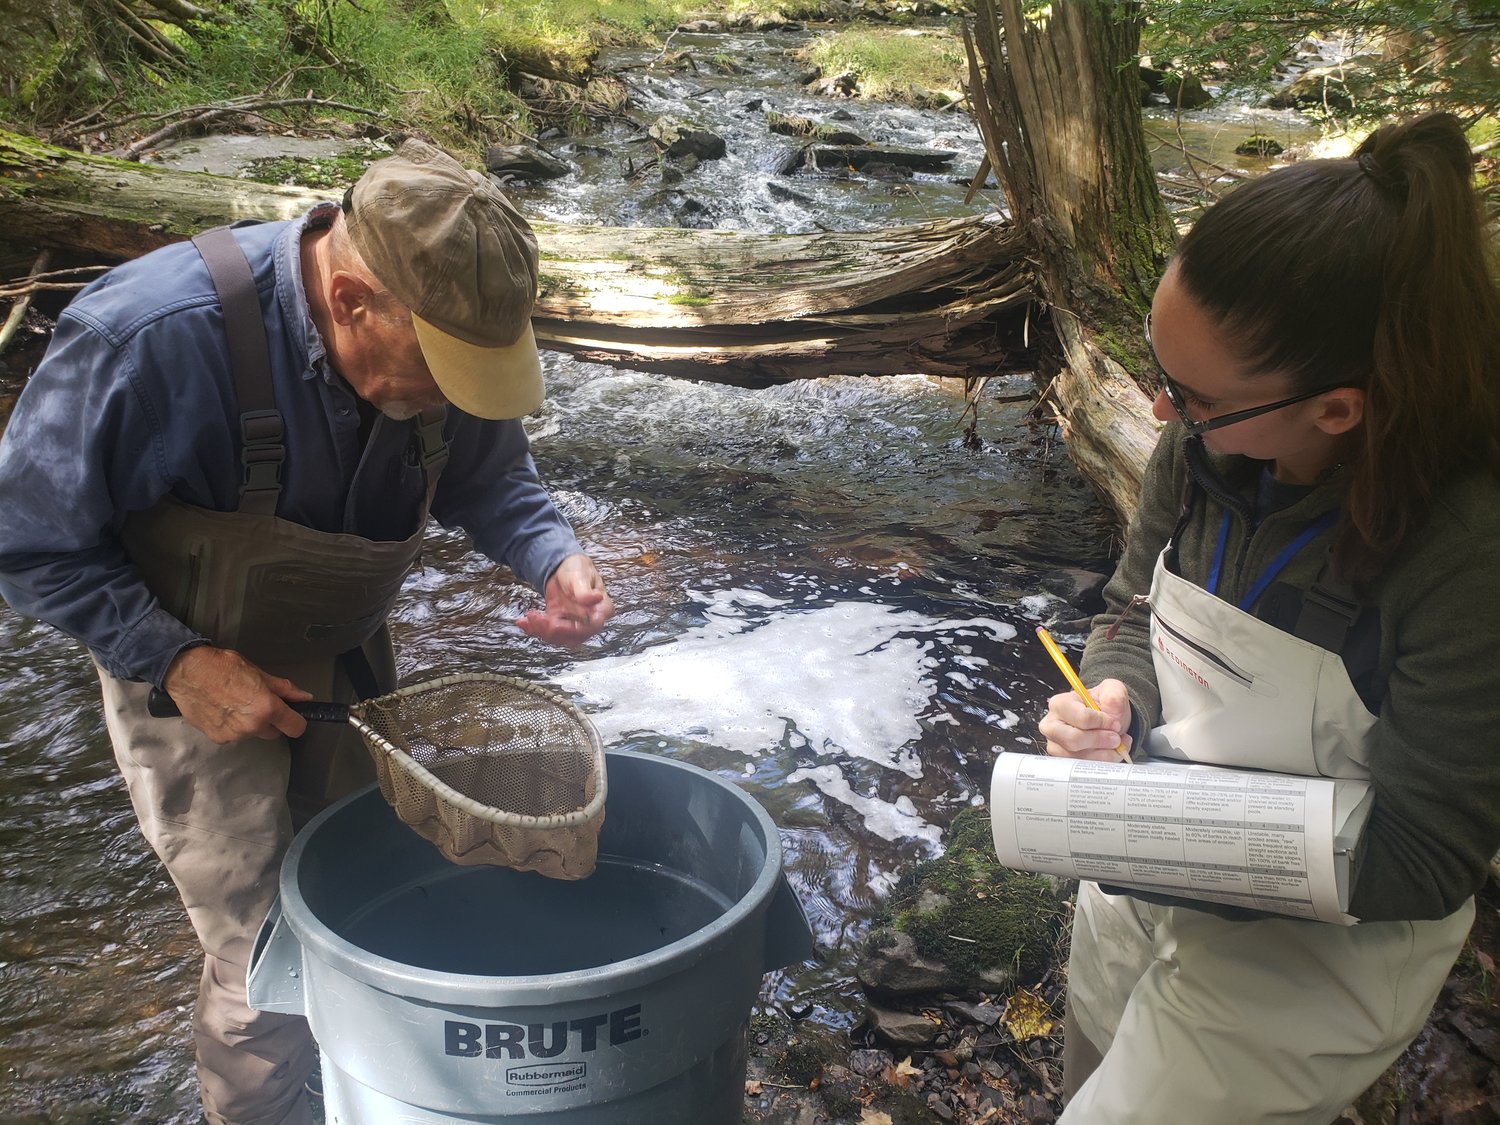 For 30 years, the Pike County Conservation District has collected surface water data throughout Pike County, PA, monitoring macroinvertebrate populations and fish populations, as well as habitat and water quality. Read the report at https://pikeconservation.org/wp-content/uploads/2021-Water-Quality-Report-FINAL.pdf.